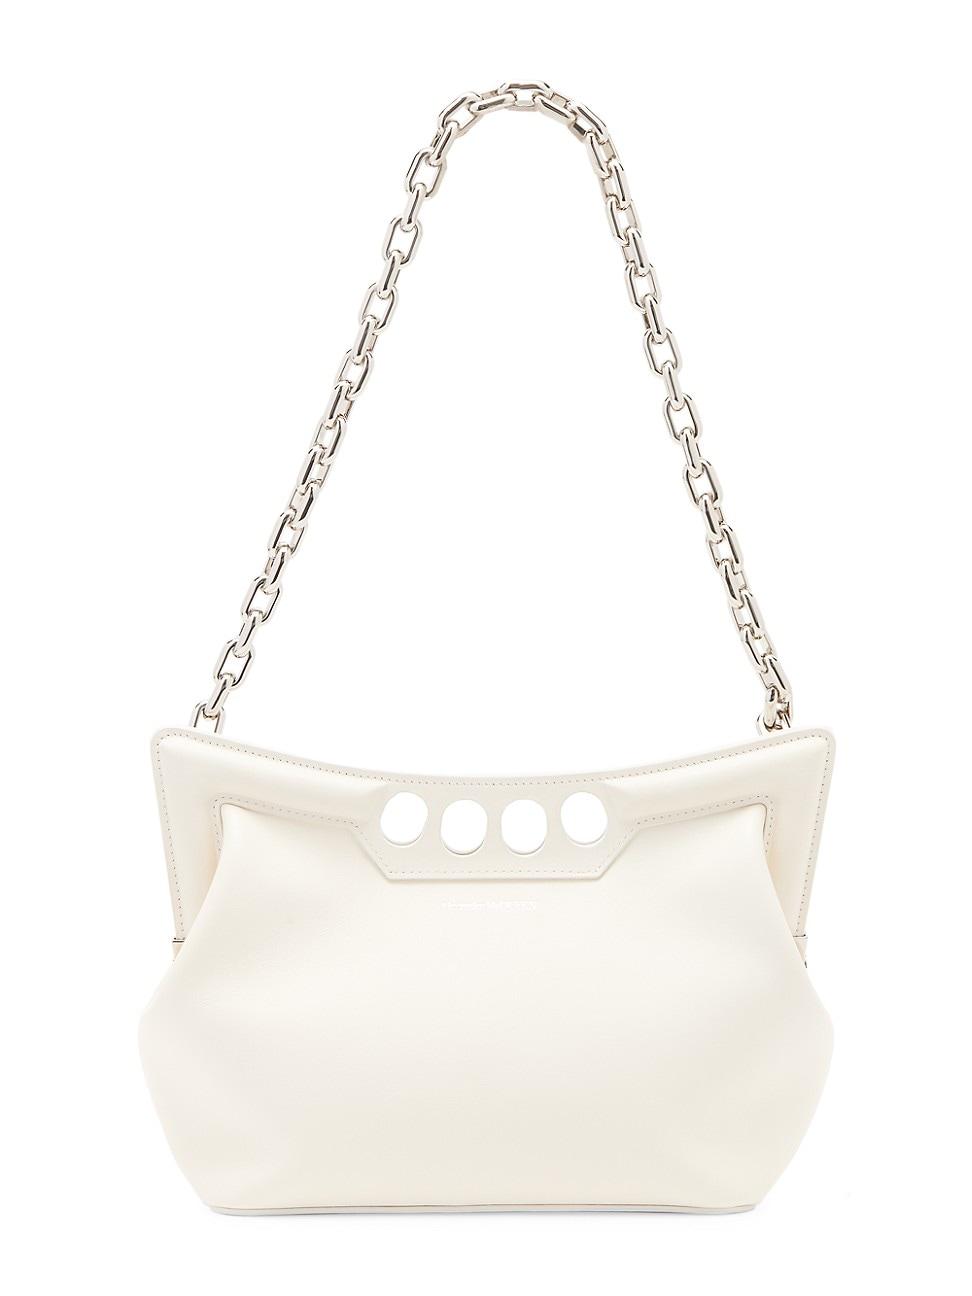 Alexander McQueen The Small Peak Leather Shoulder Bag in White | Lyst